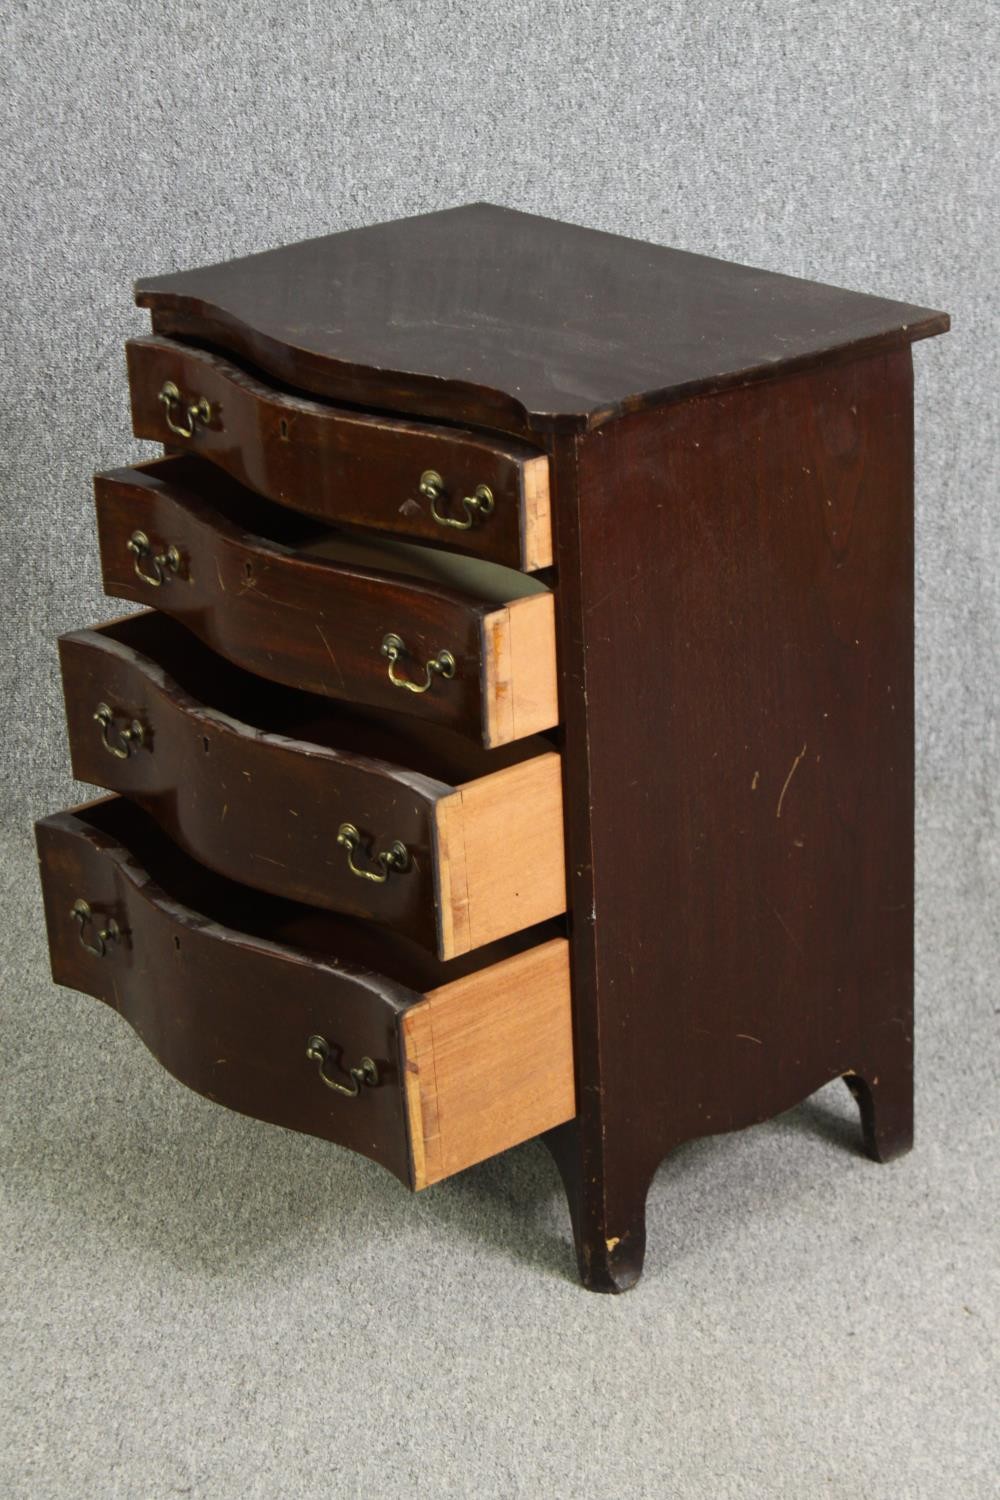 A small George III style mahogany chest of drawers, early 20th century. H.74 W.59 D.41cm. - Image 4 of 5